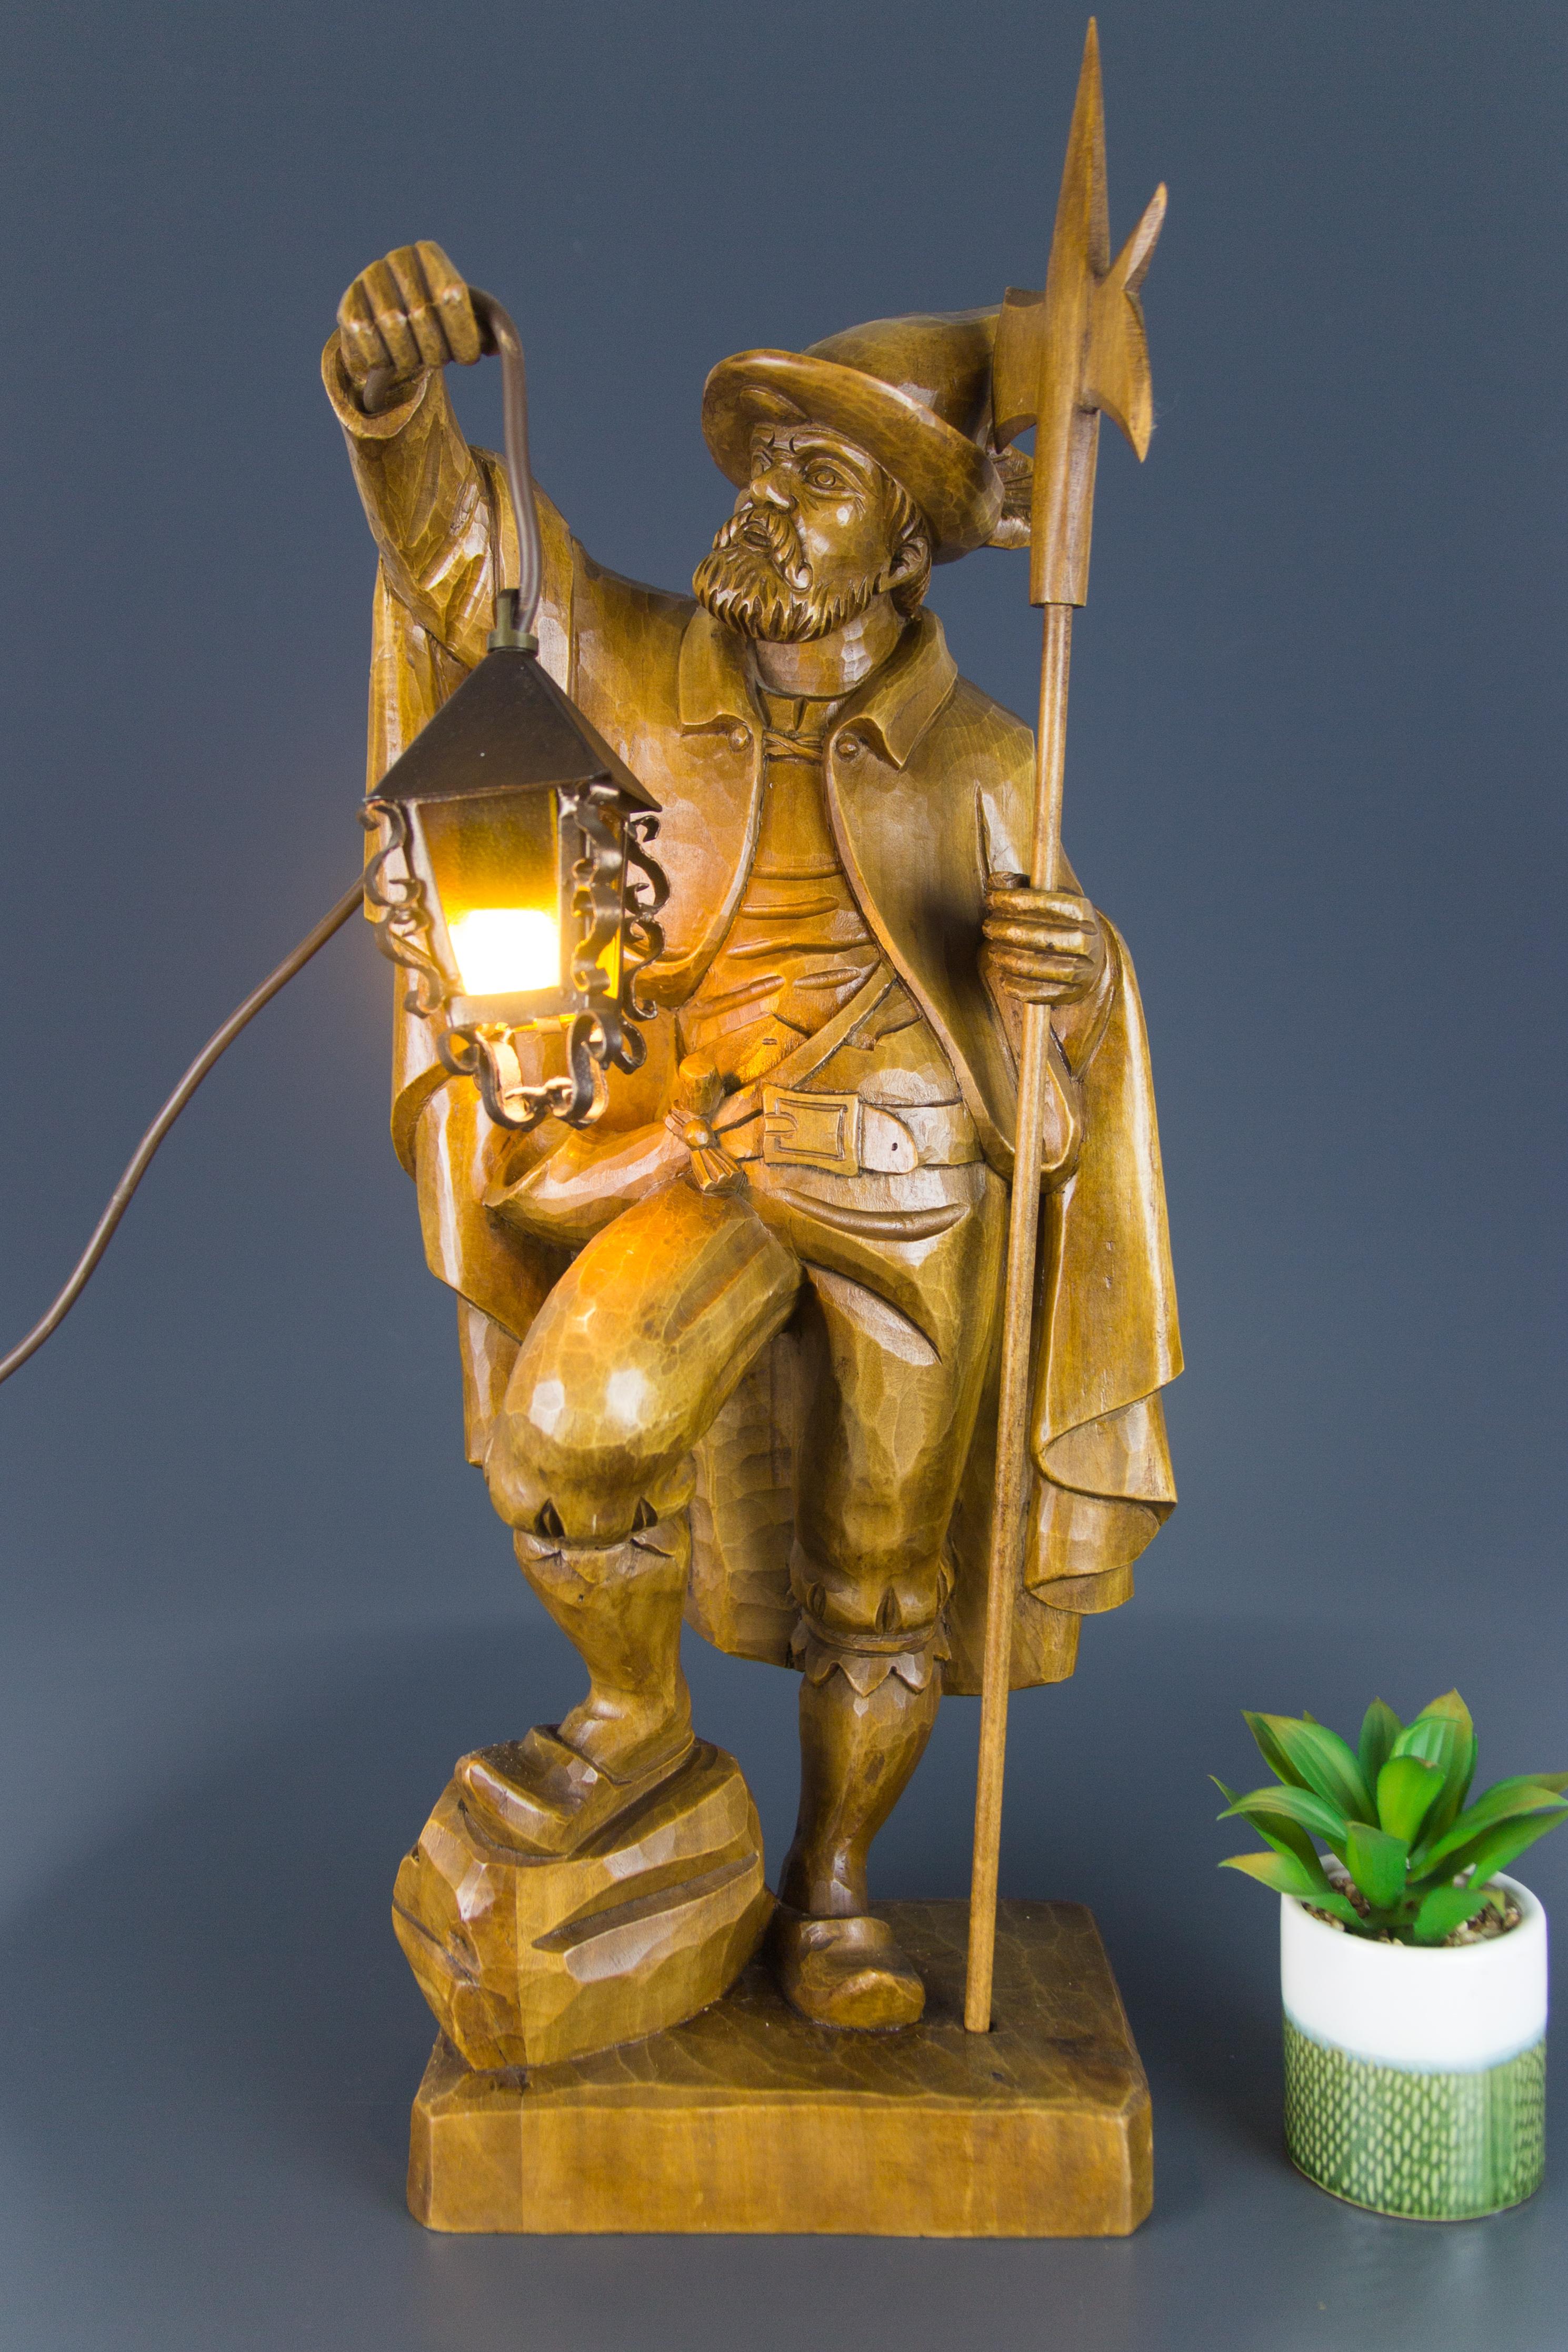 German Hand Carved Wooden Figurative Sculpture Lamp Night Watchman with Lantern 4